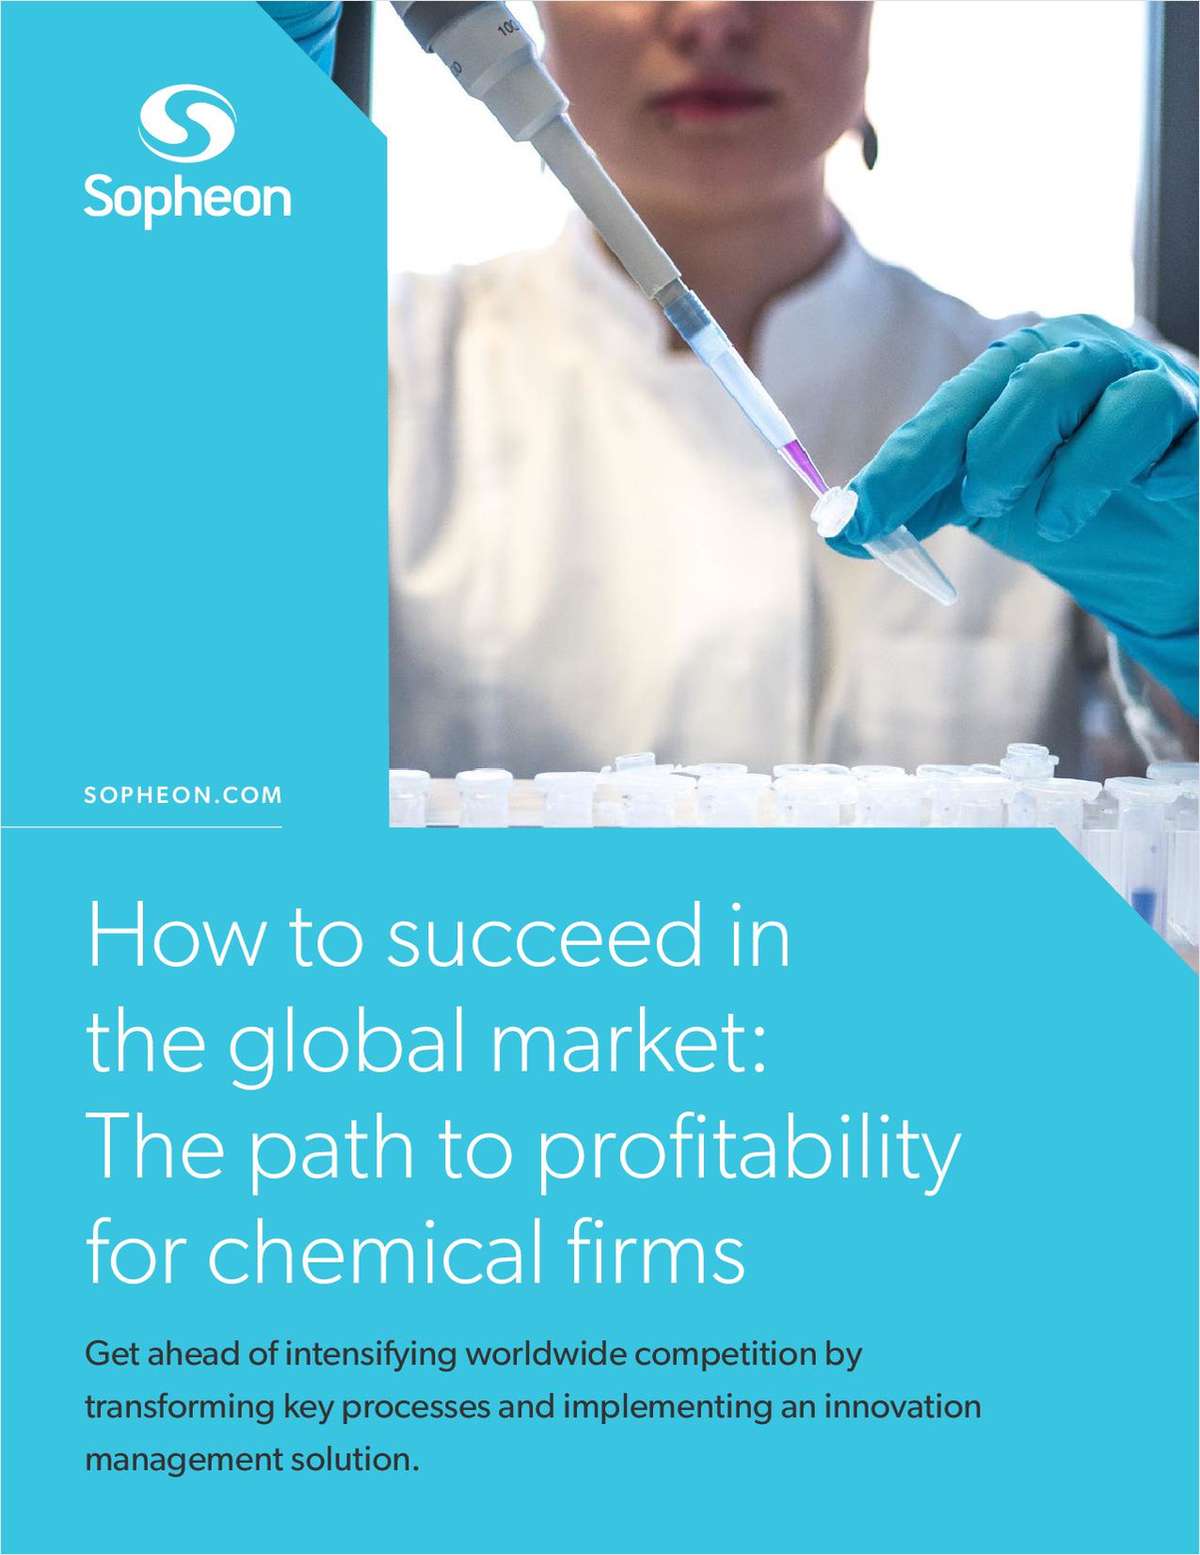 How to succeed in the global market: The path to profitability for chemical firms